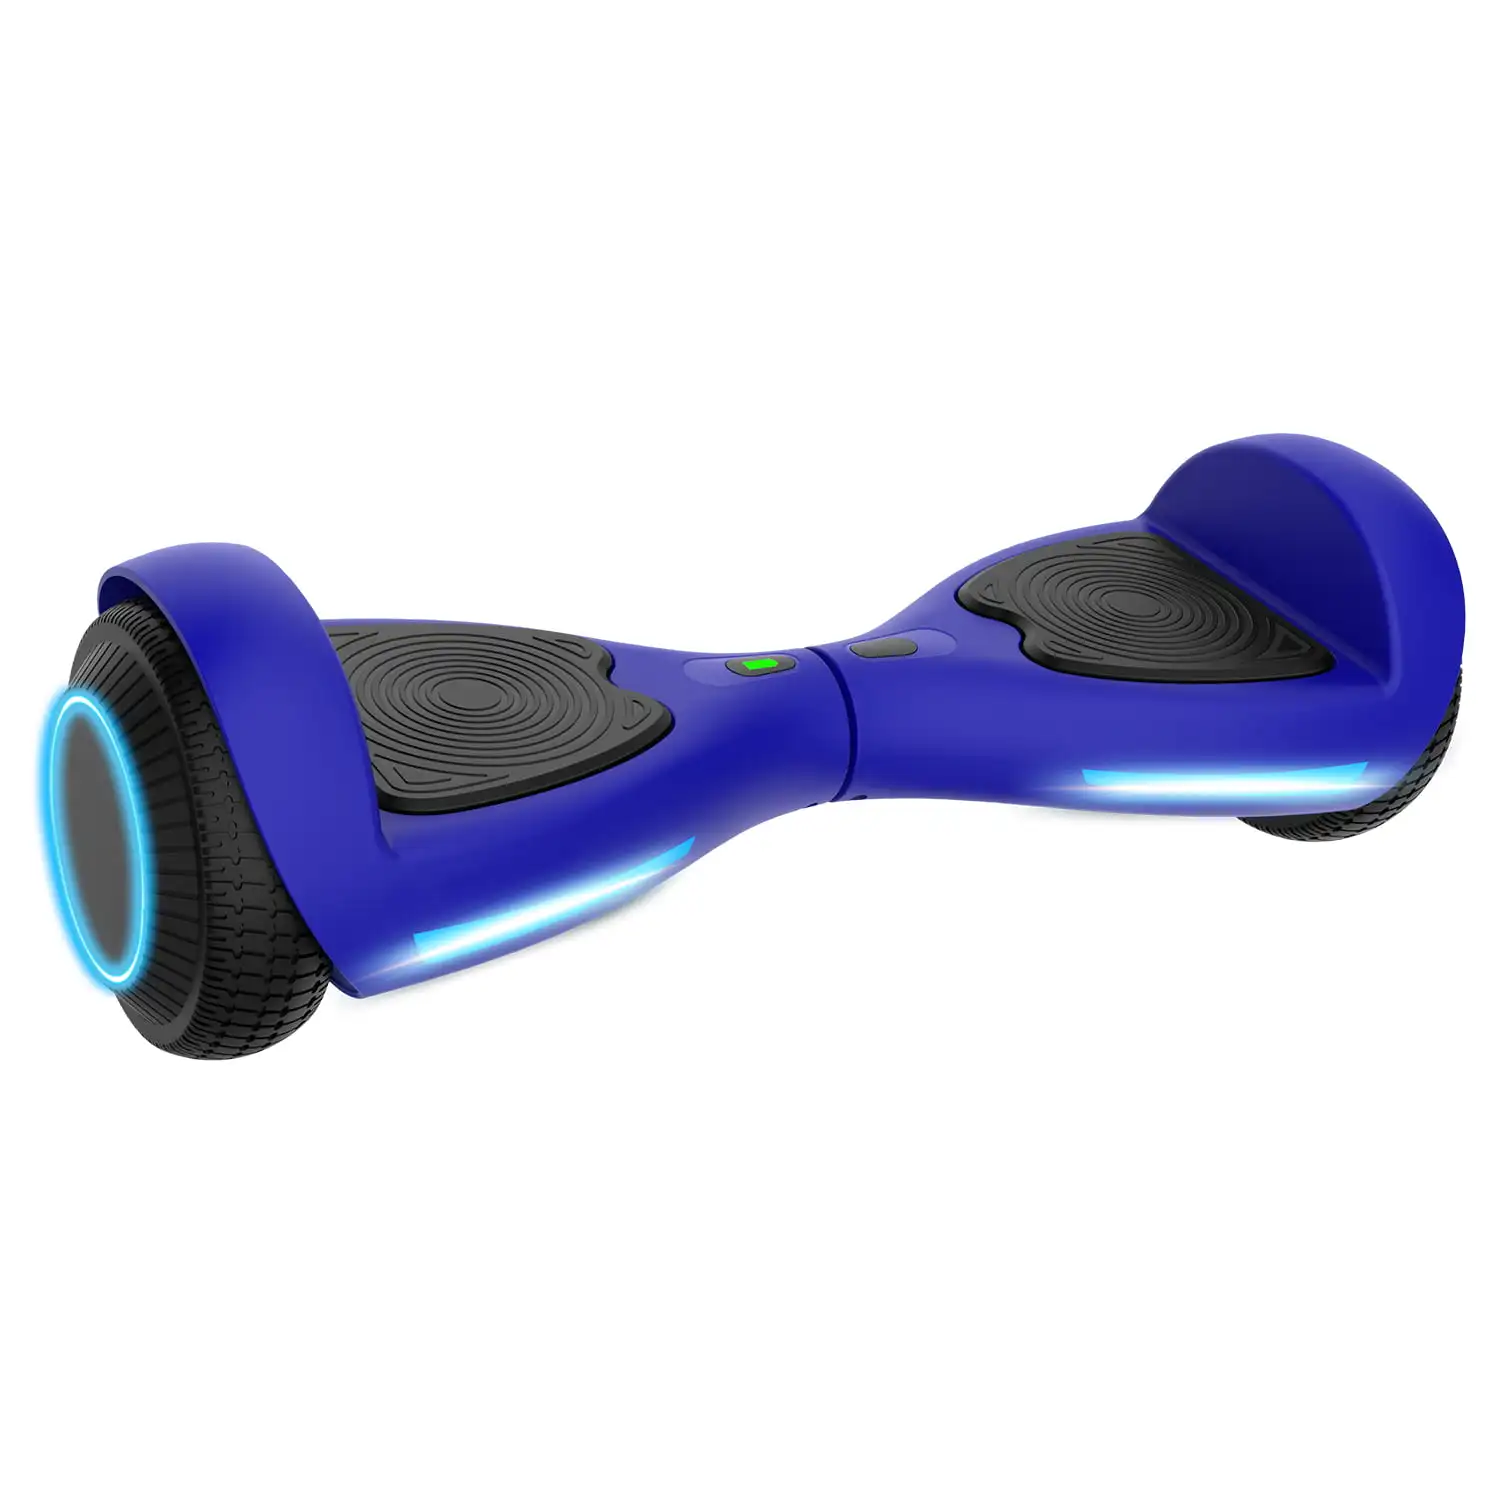 FX3 Hoverboard with 6.2 Mph Max Speed, 176 lbs Max Weight, 3.1 Miles Distance, Self Balancing Scooter with 6.5 inch Wheels and L